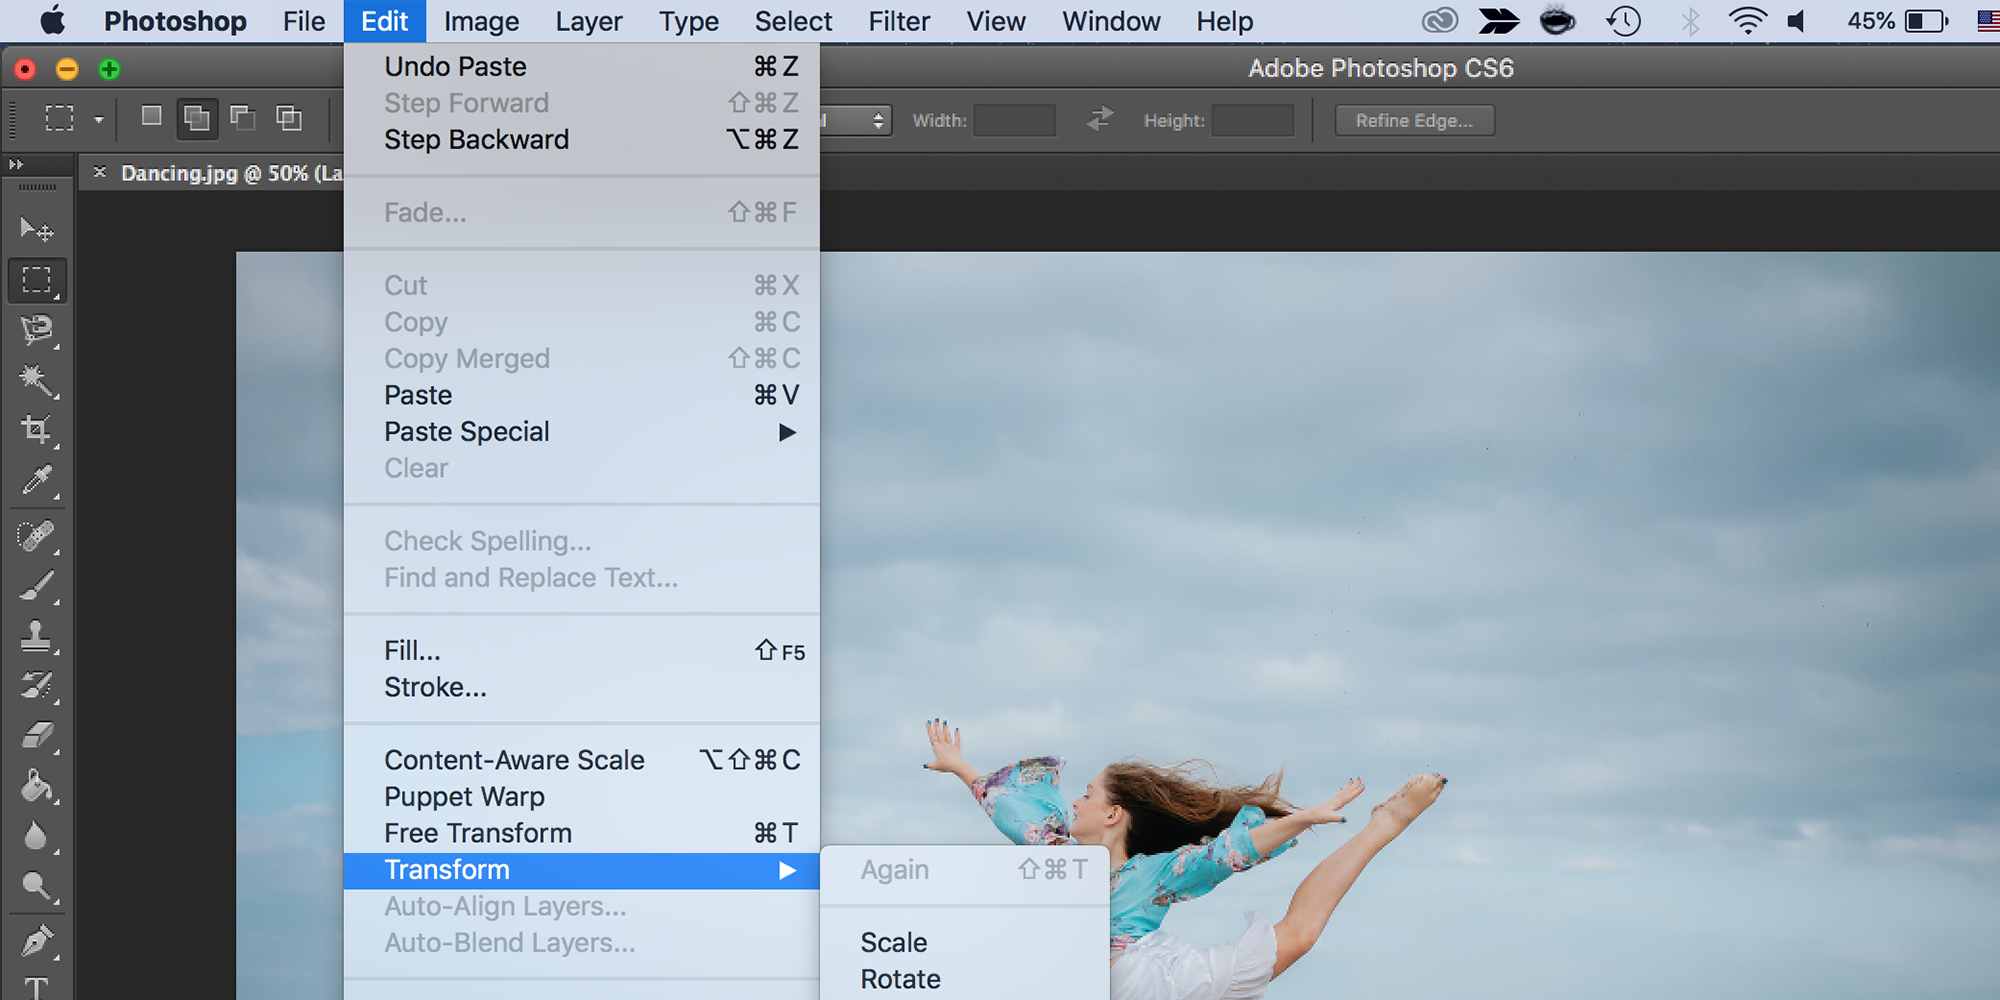 How to Rotate an Image in Photoshop